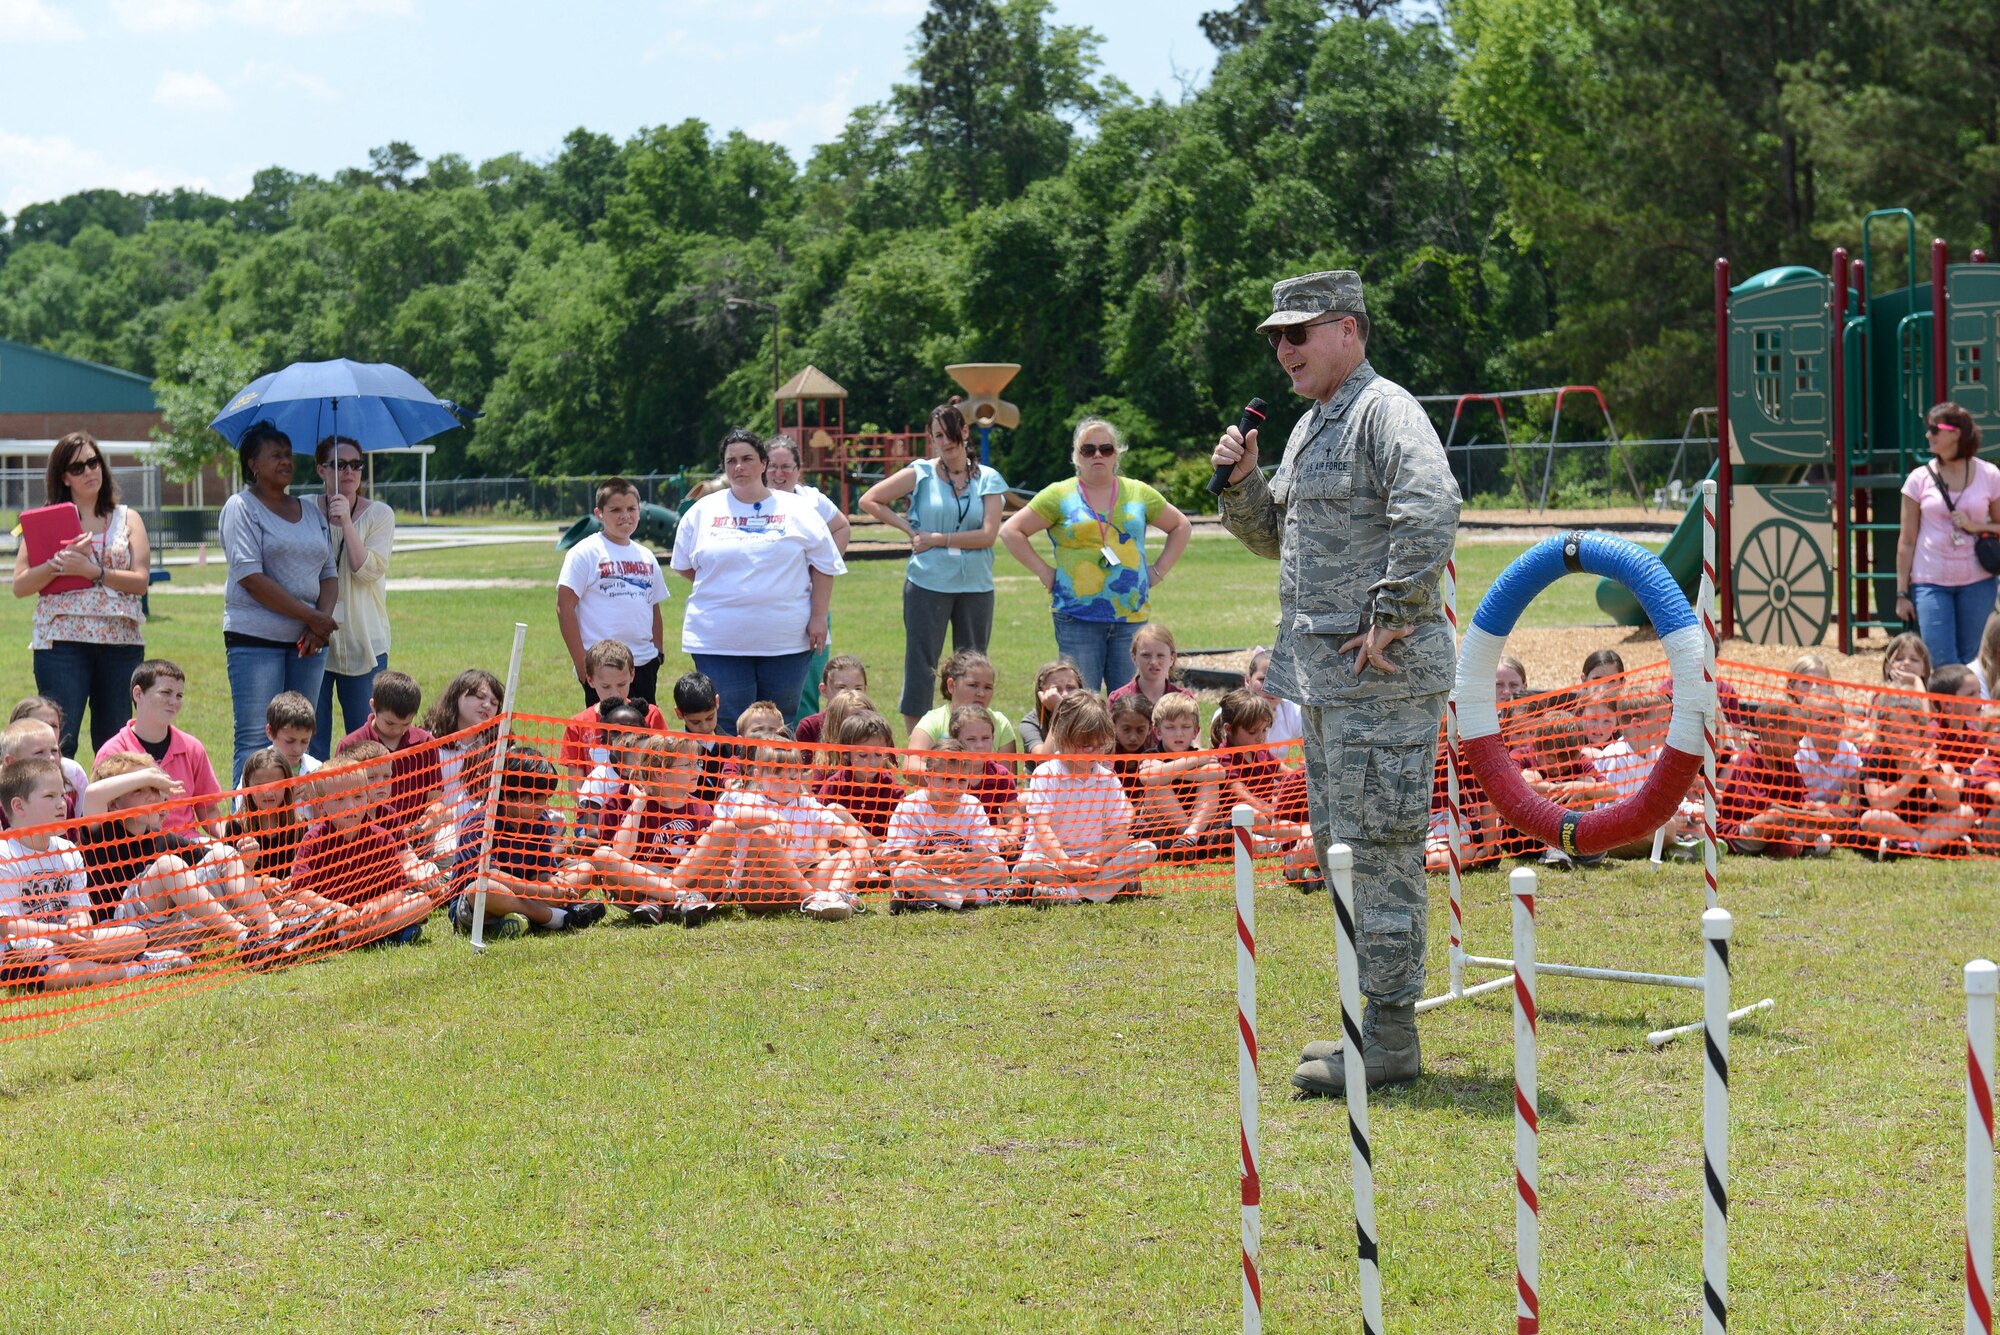 U.S. Air National Guard Capt. Brannon T. Bowman, 165th Airlift Wing Chaplain, tells students about careers in the Air National Guard, May 10, 2013 at Sand Hill Elementary in Guyton, Ga. Bowman was also a guest speaker at the Sand Hill Elementary Veterans Day program. (U.S. Air National Guard photo by Tech. Sgt. Charles Delano/Released)